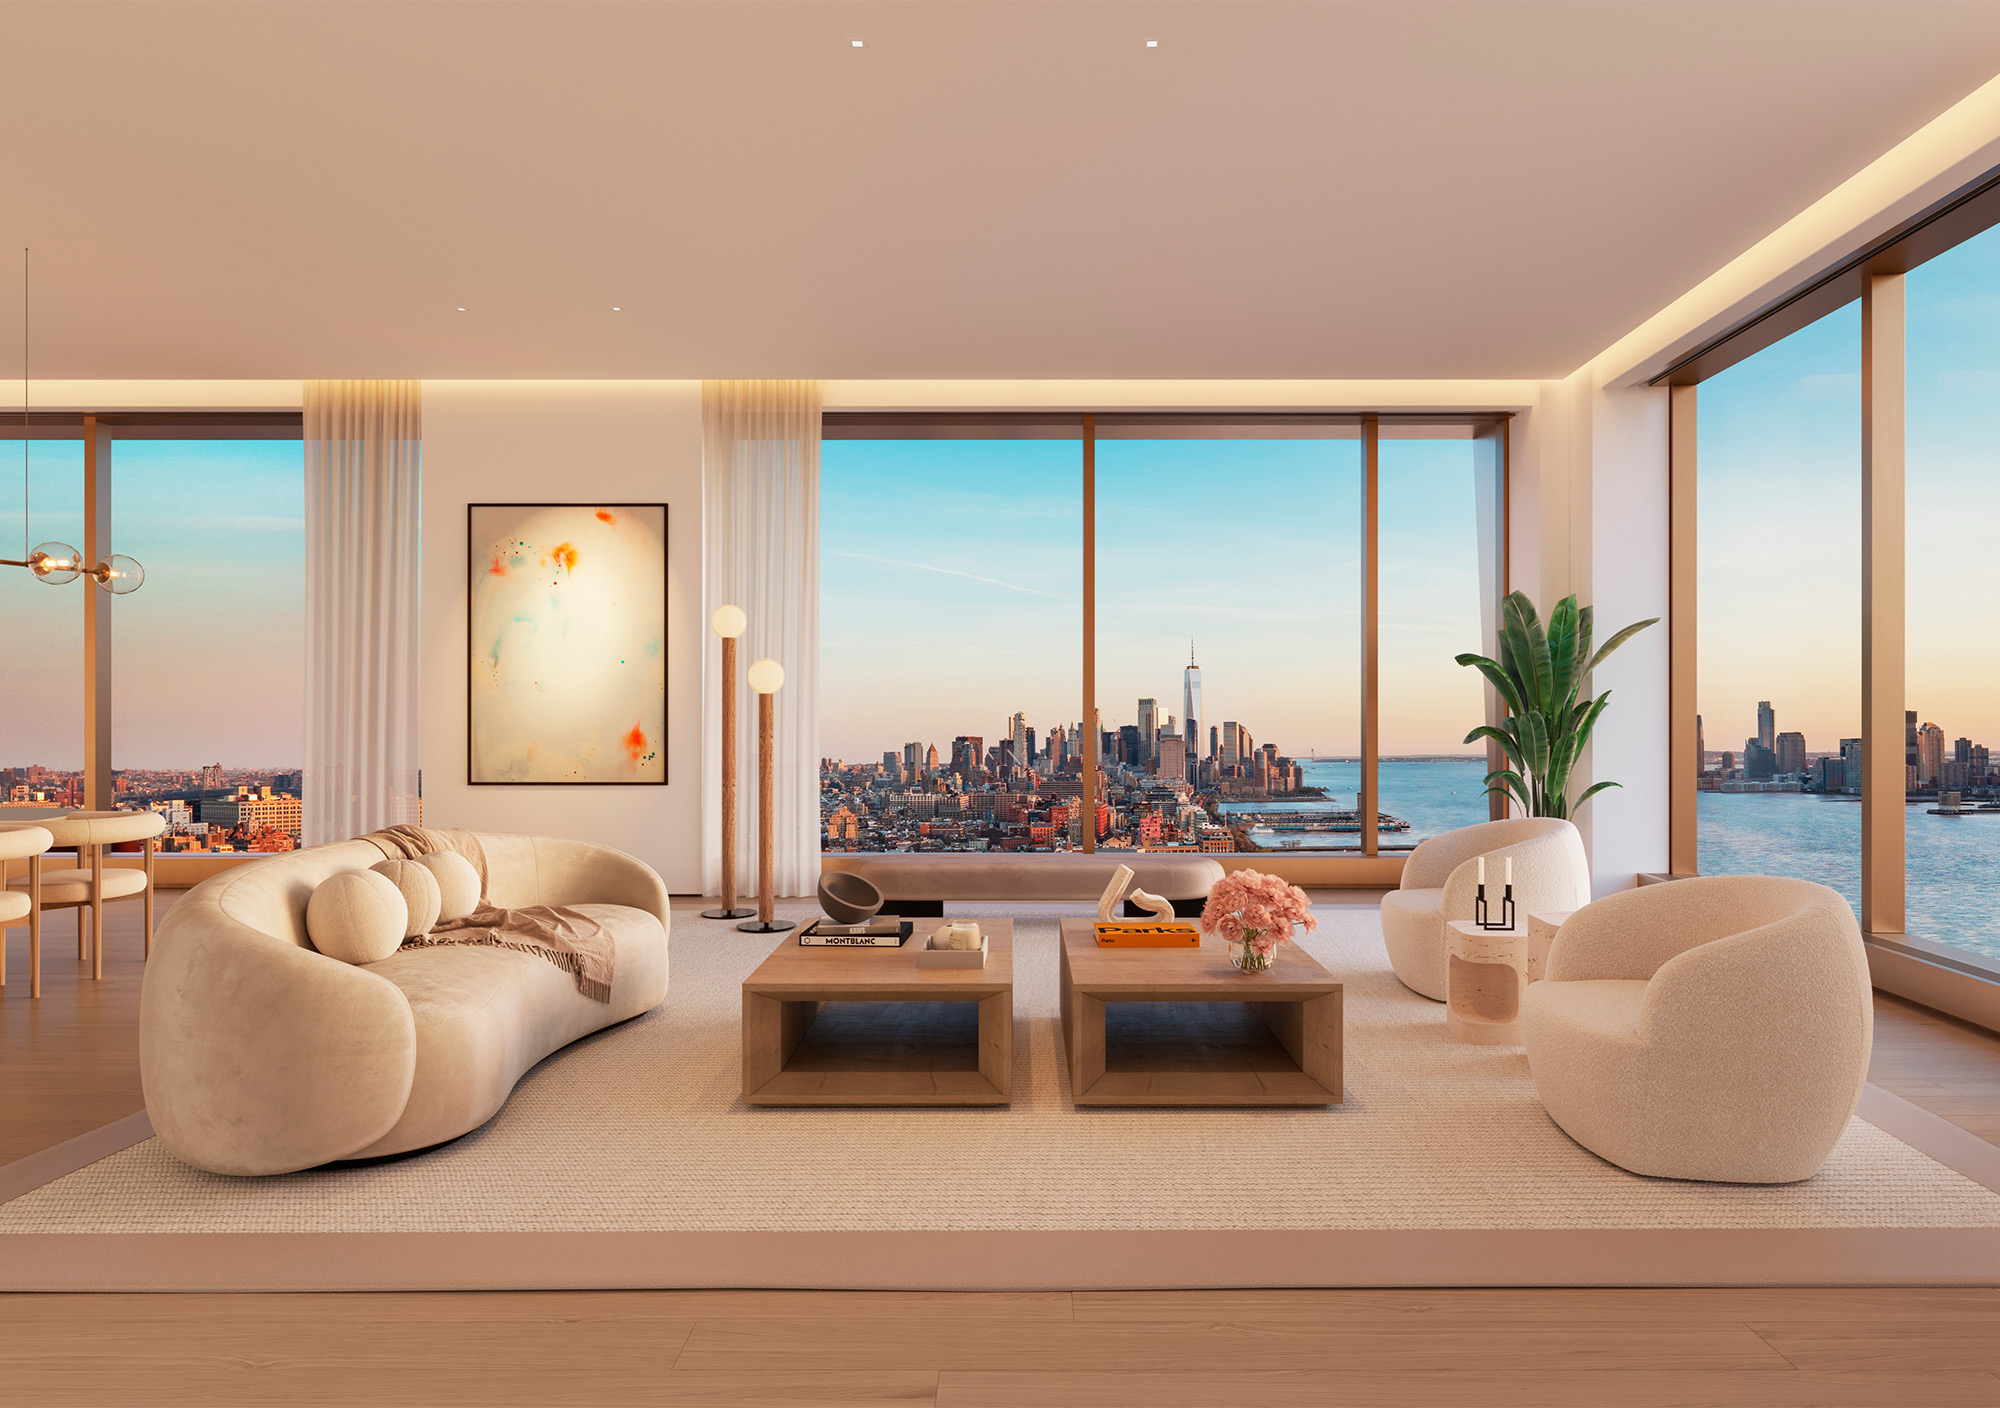 Luxurious living area with creme furniture overlooking the city skyline at sunset